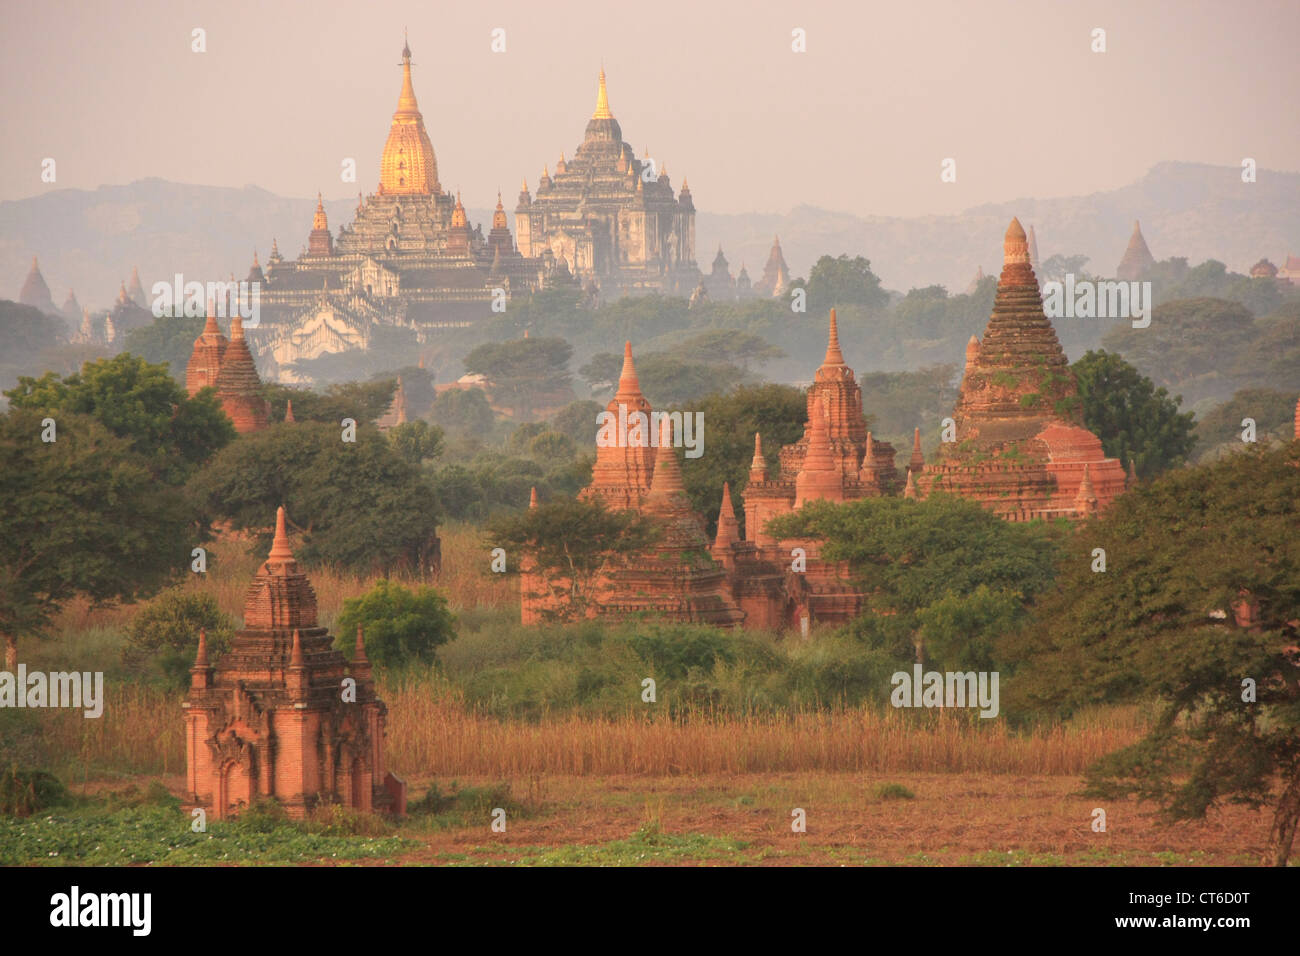 Temples of Bagan in morning mist, Bagan Archaeological Zone, Mandalay region, Myanmar, Southeast Asia Stock Photo